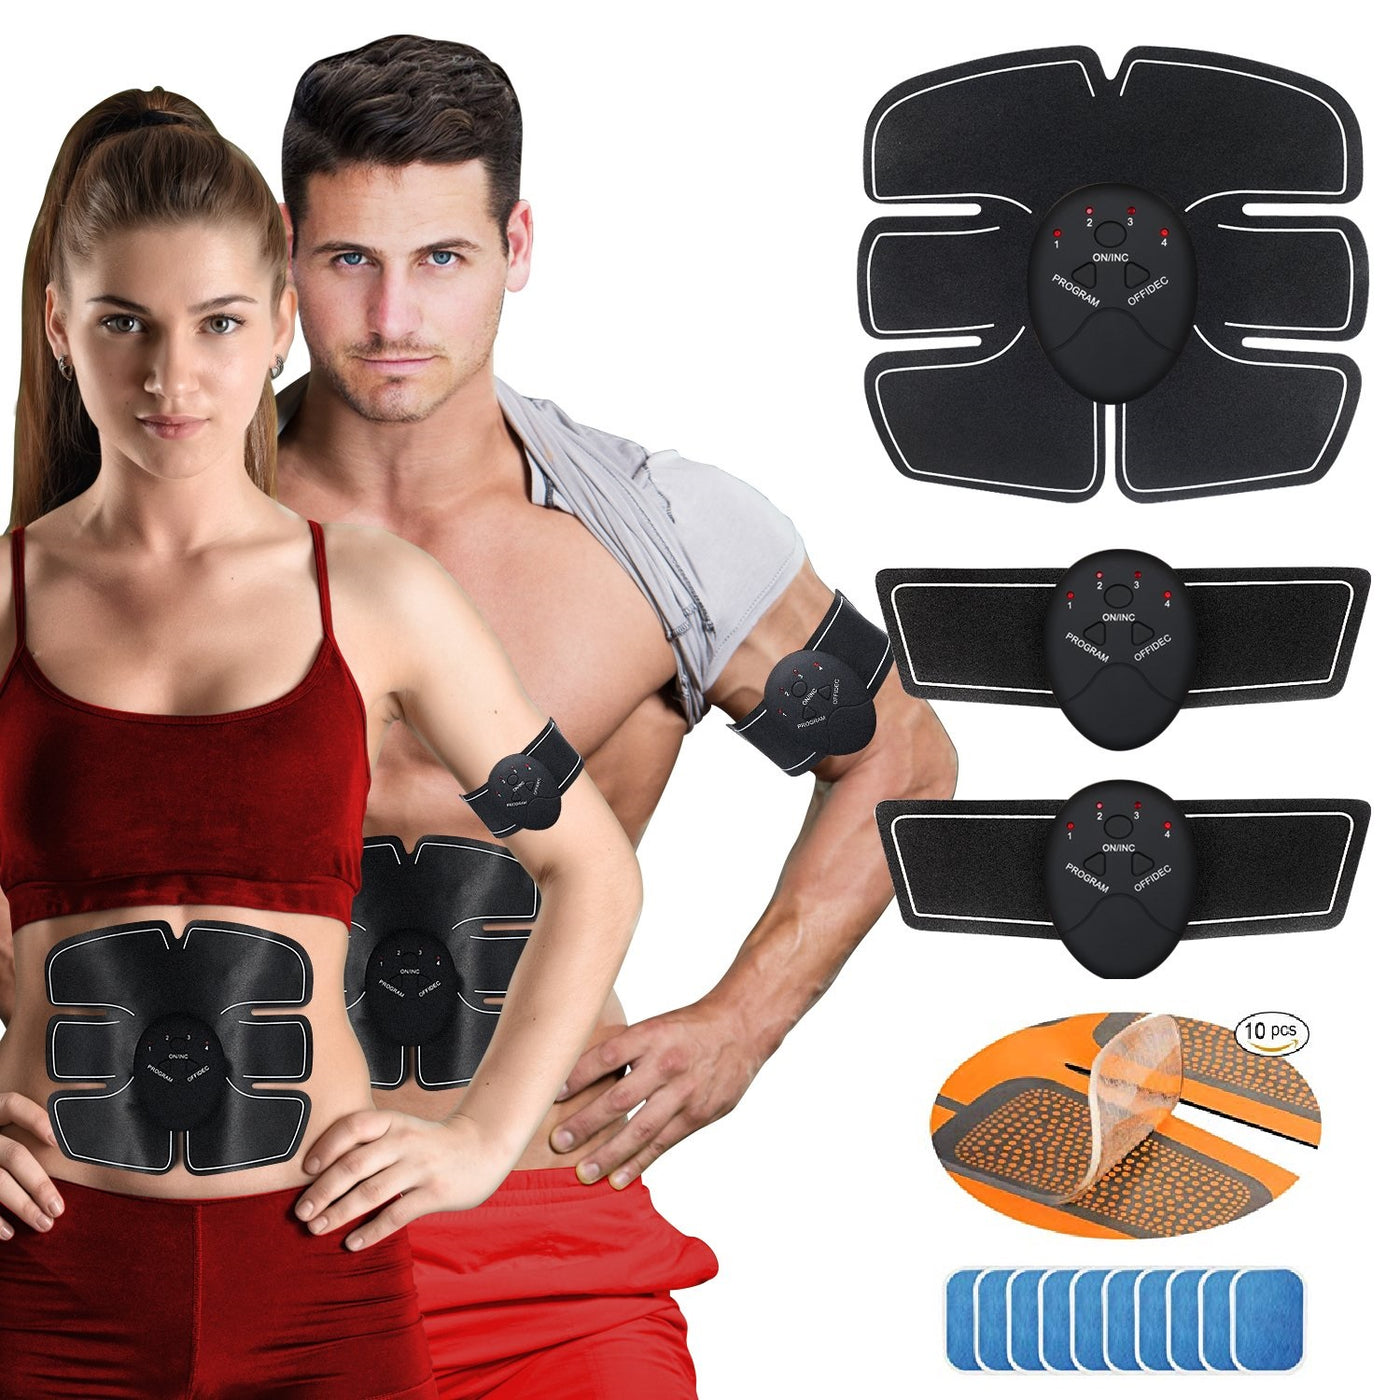 Abs Stimulator Ultimate Muscle Trainer Toner, EMS Abdominal Toning